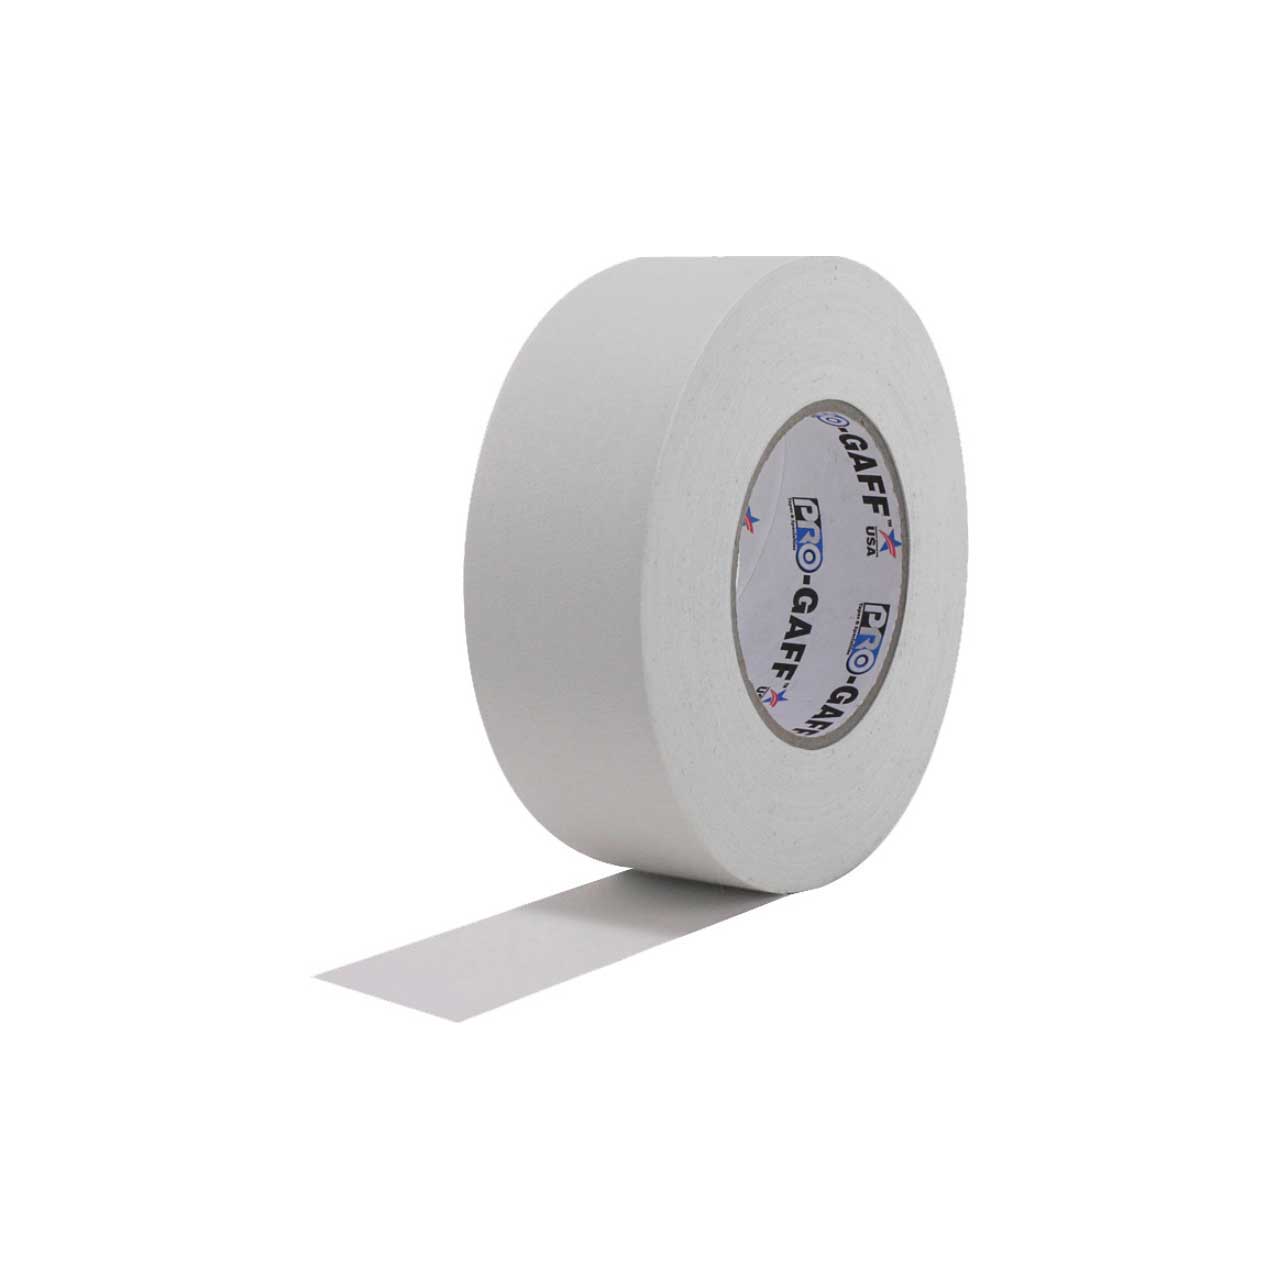 Pro Tapes WGT55-2-24 Pro Gaff Gaffers Tape WGT-60 2 Inch x 55 Yards - White - 24 Pack WGT55-2-24